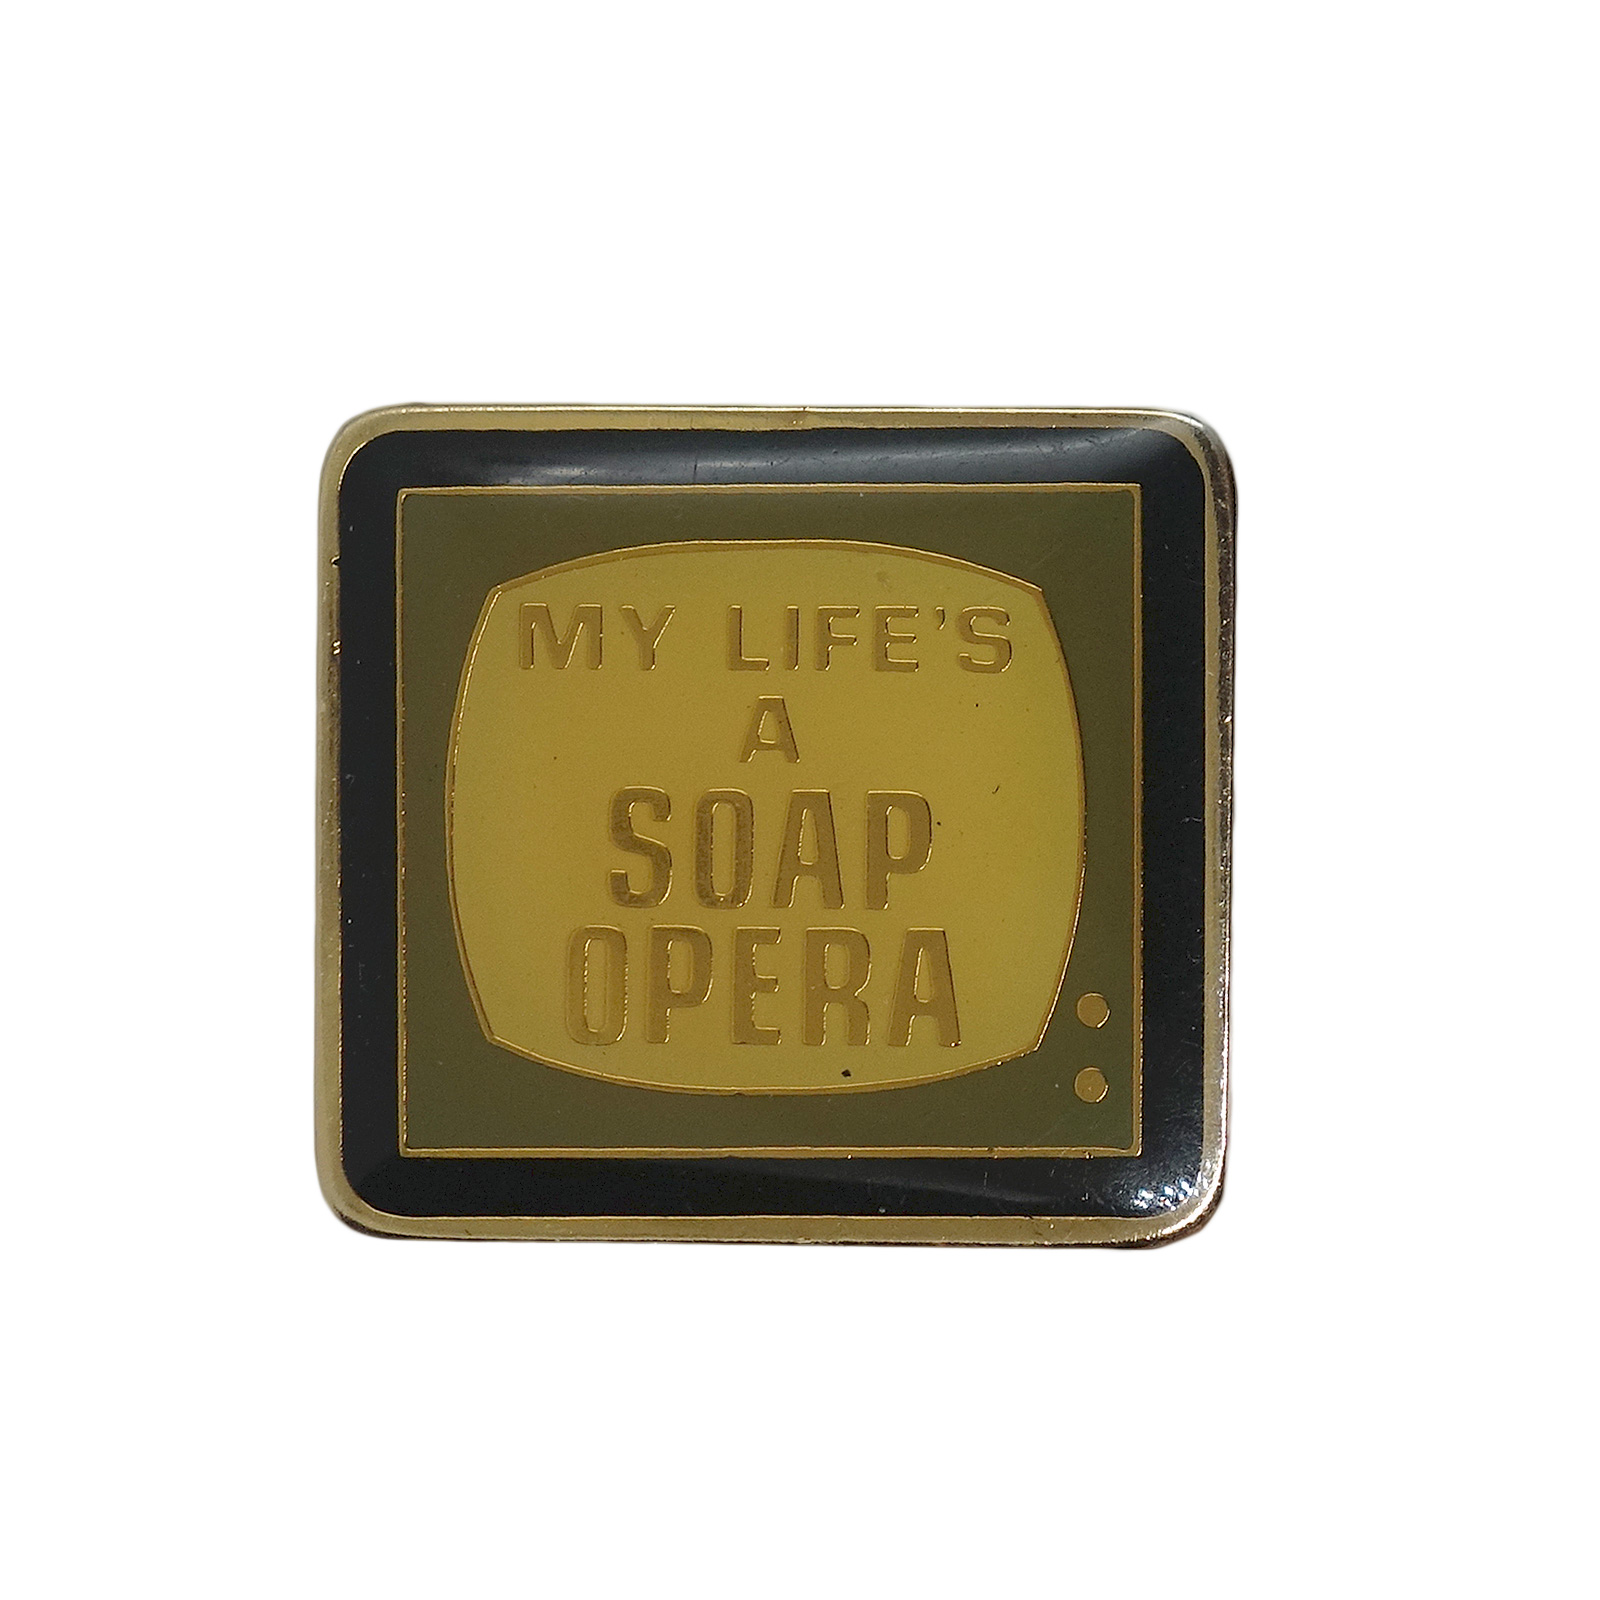 MY LIFE'S A SOAP OPERA ピンズ 留め具付き